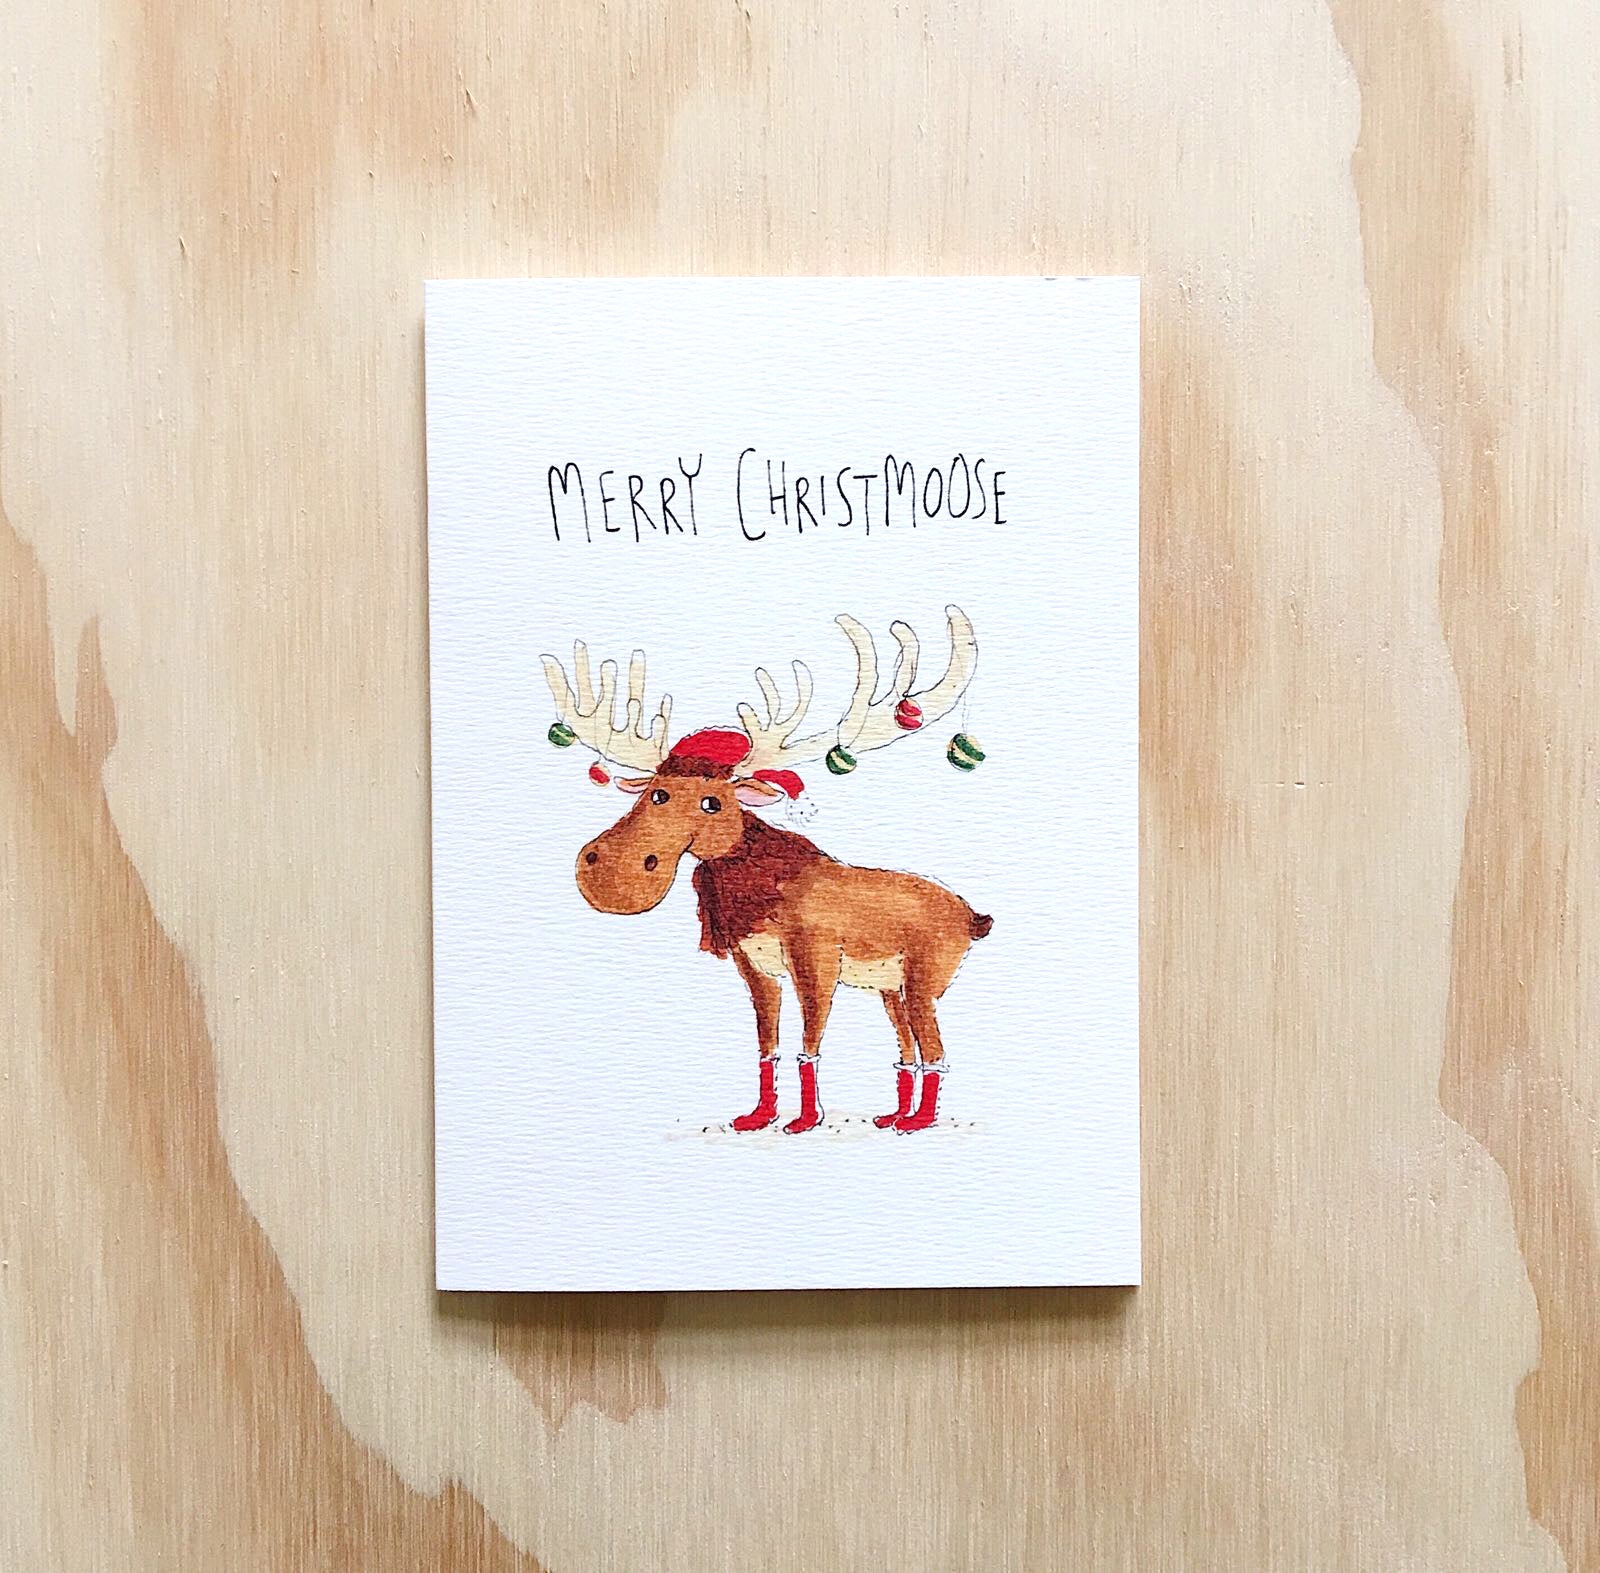 Merry Christmoose - Well Drawn